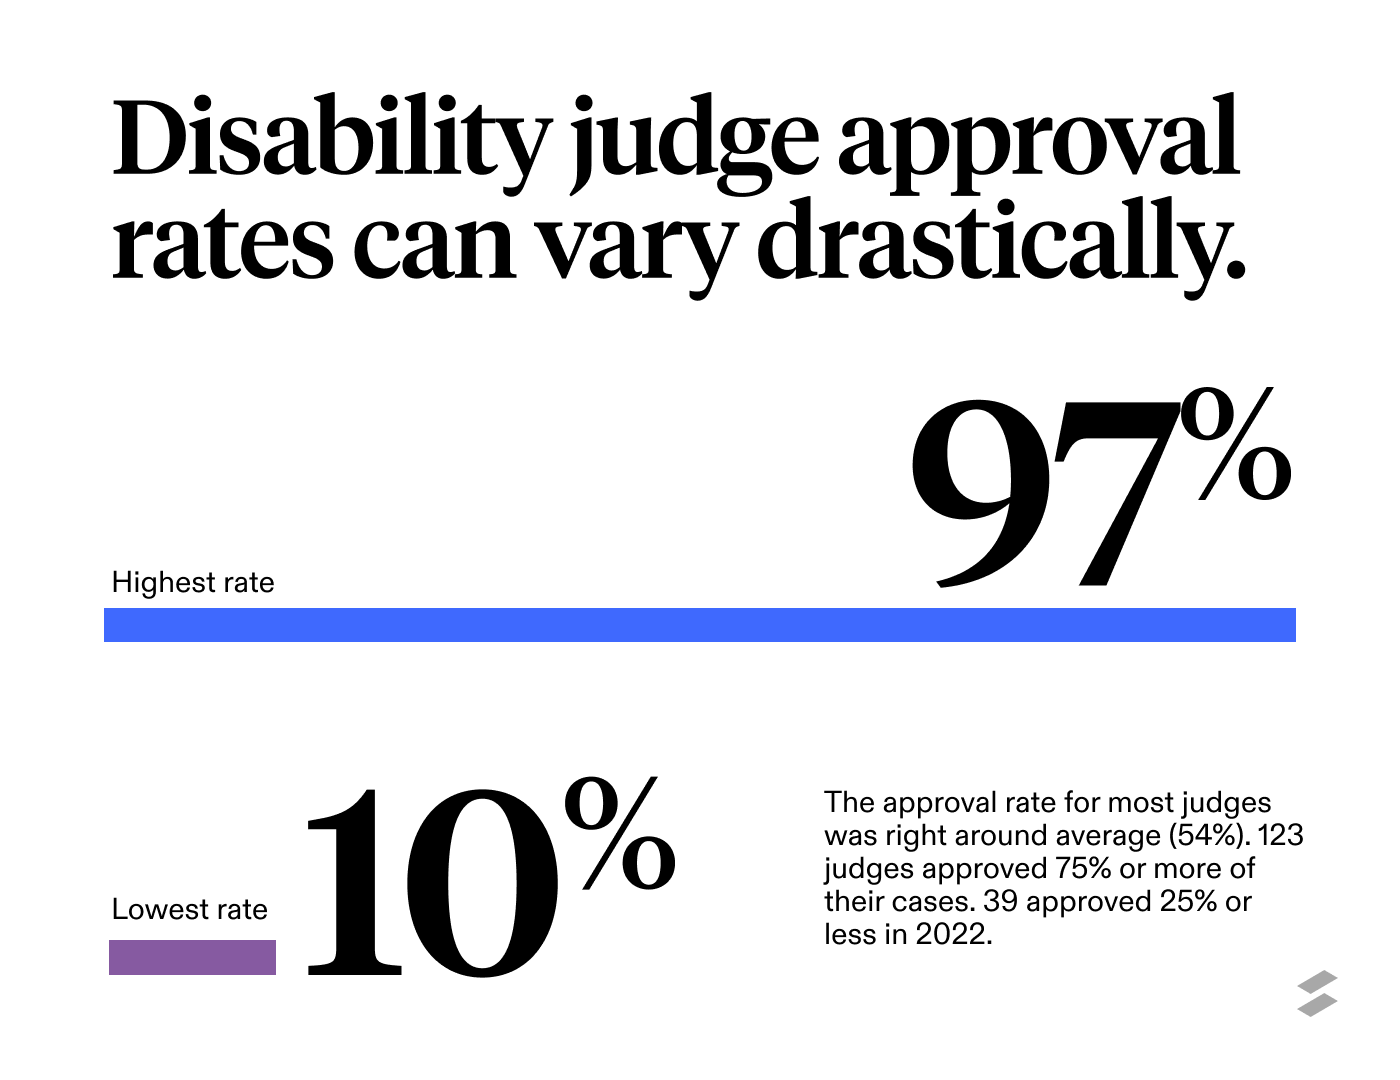 Disability judge approval rates